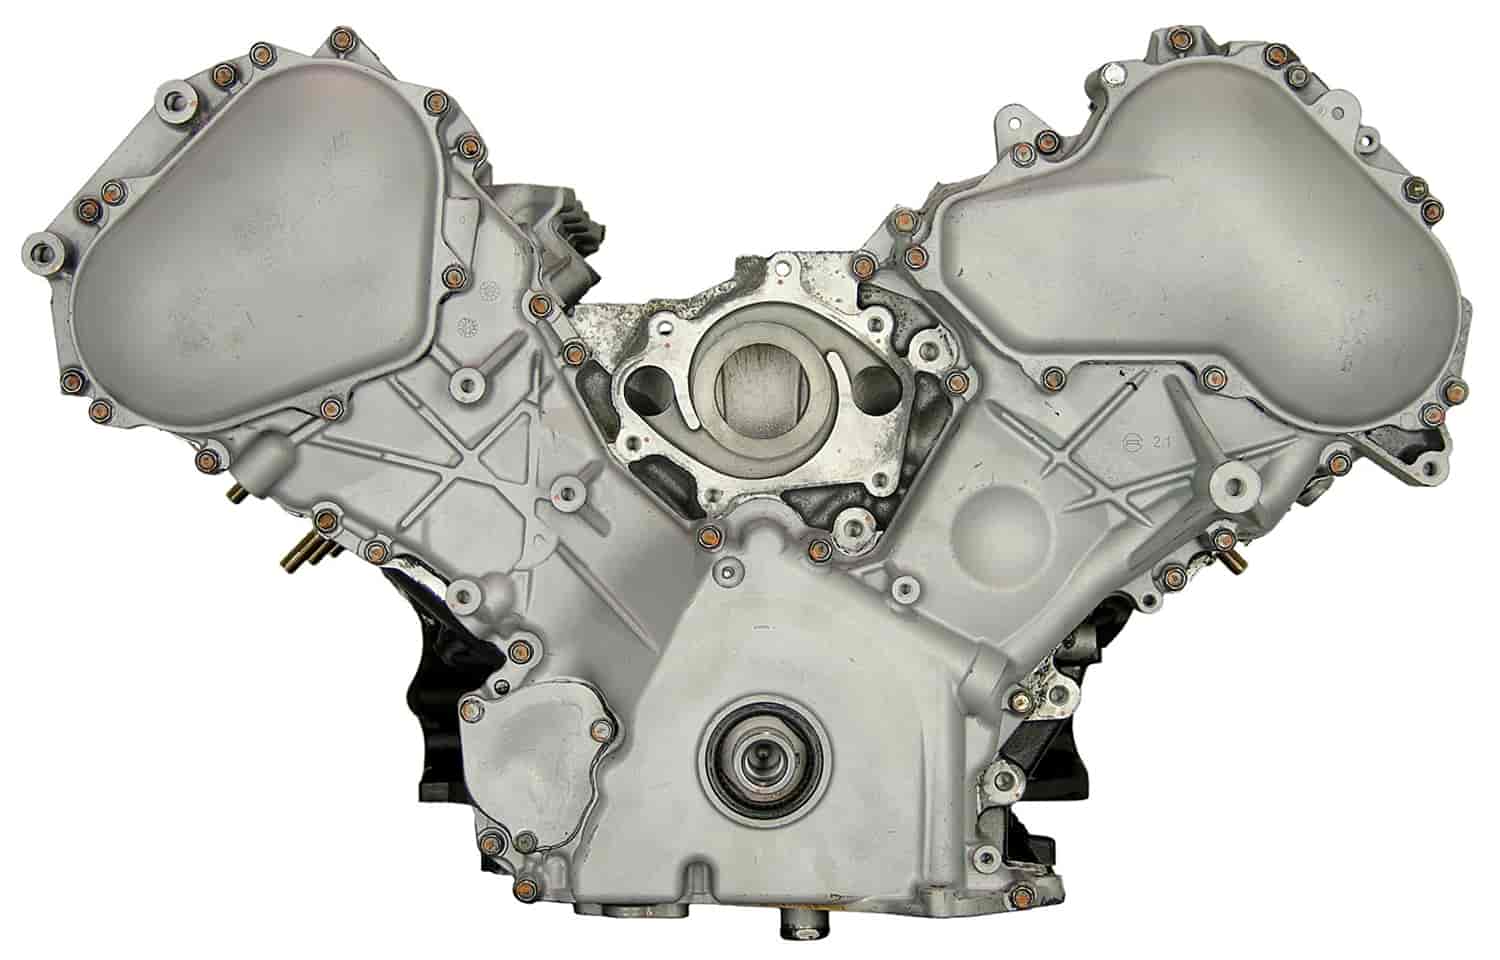 Remanufactured Crate Engine for 2004-2006 Nissan & Infinity with 5.6L V8 VK56DE